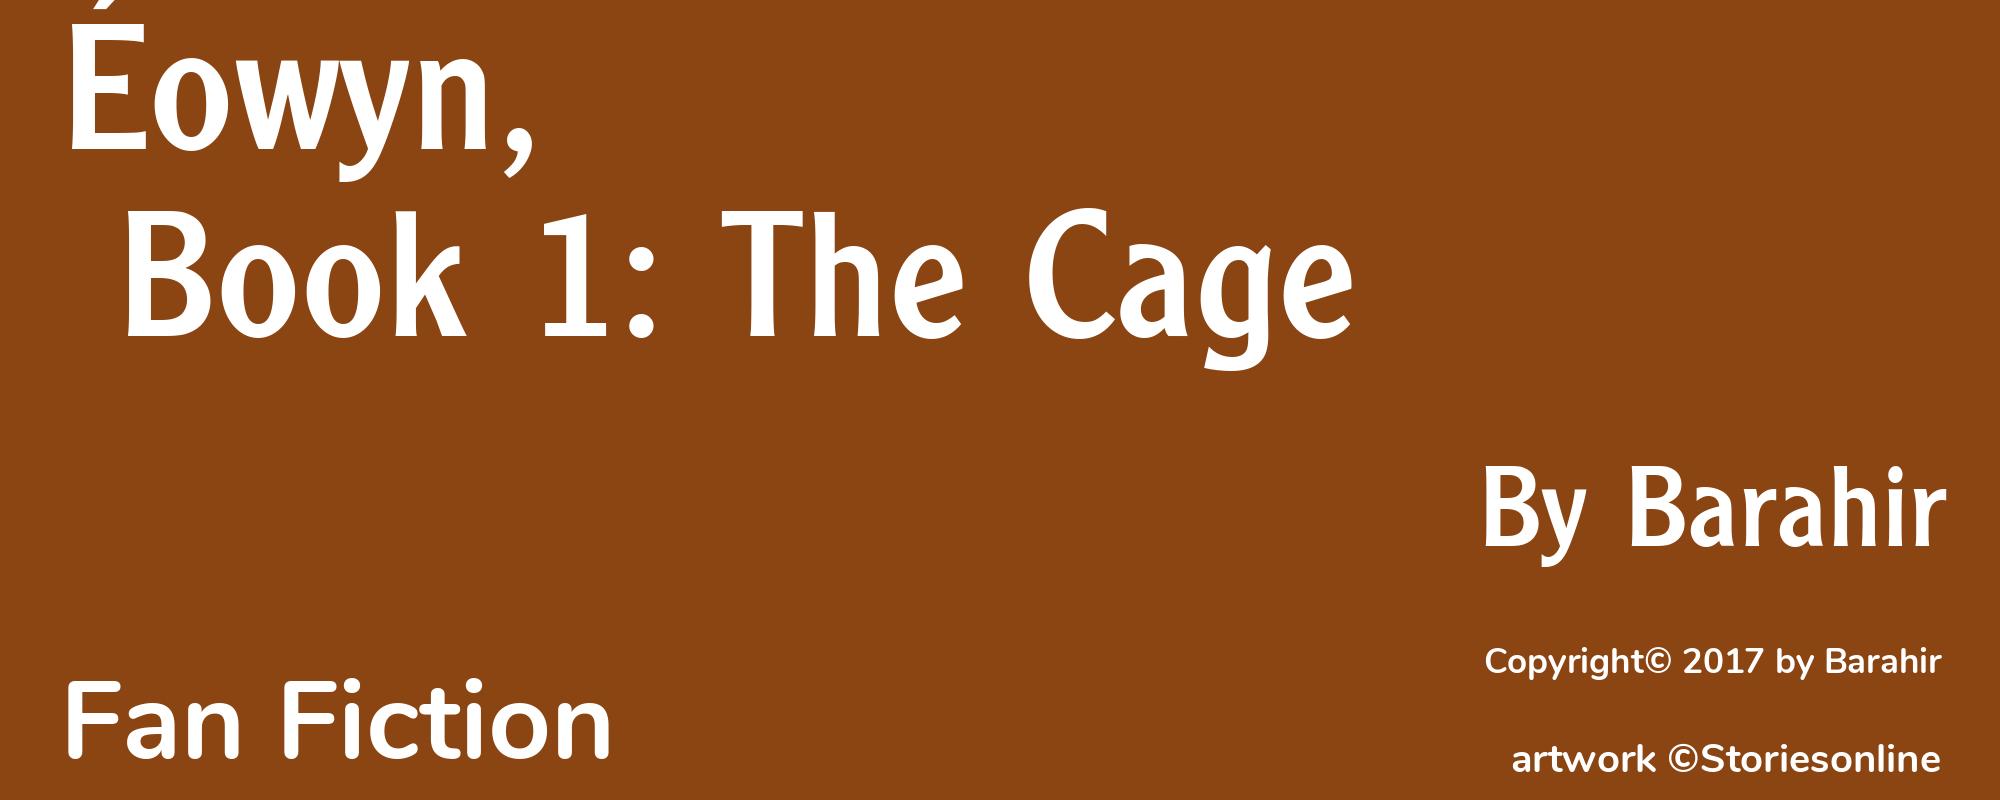 Éowyn, Book 1: The Cage - Cover